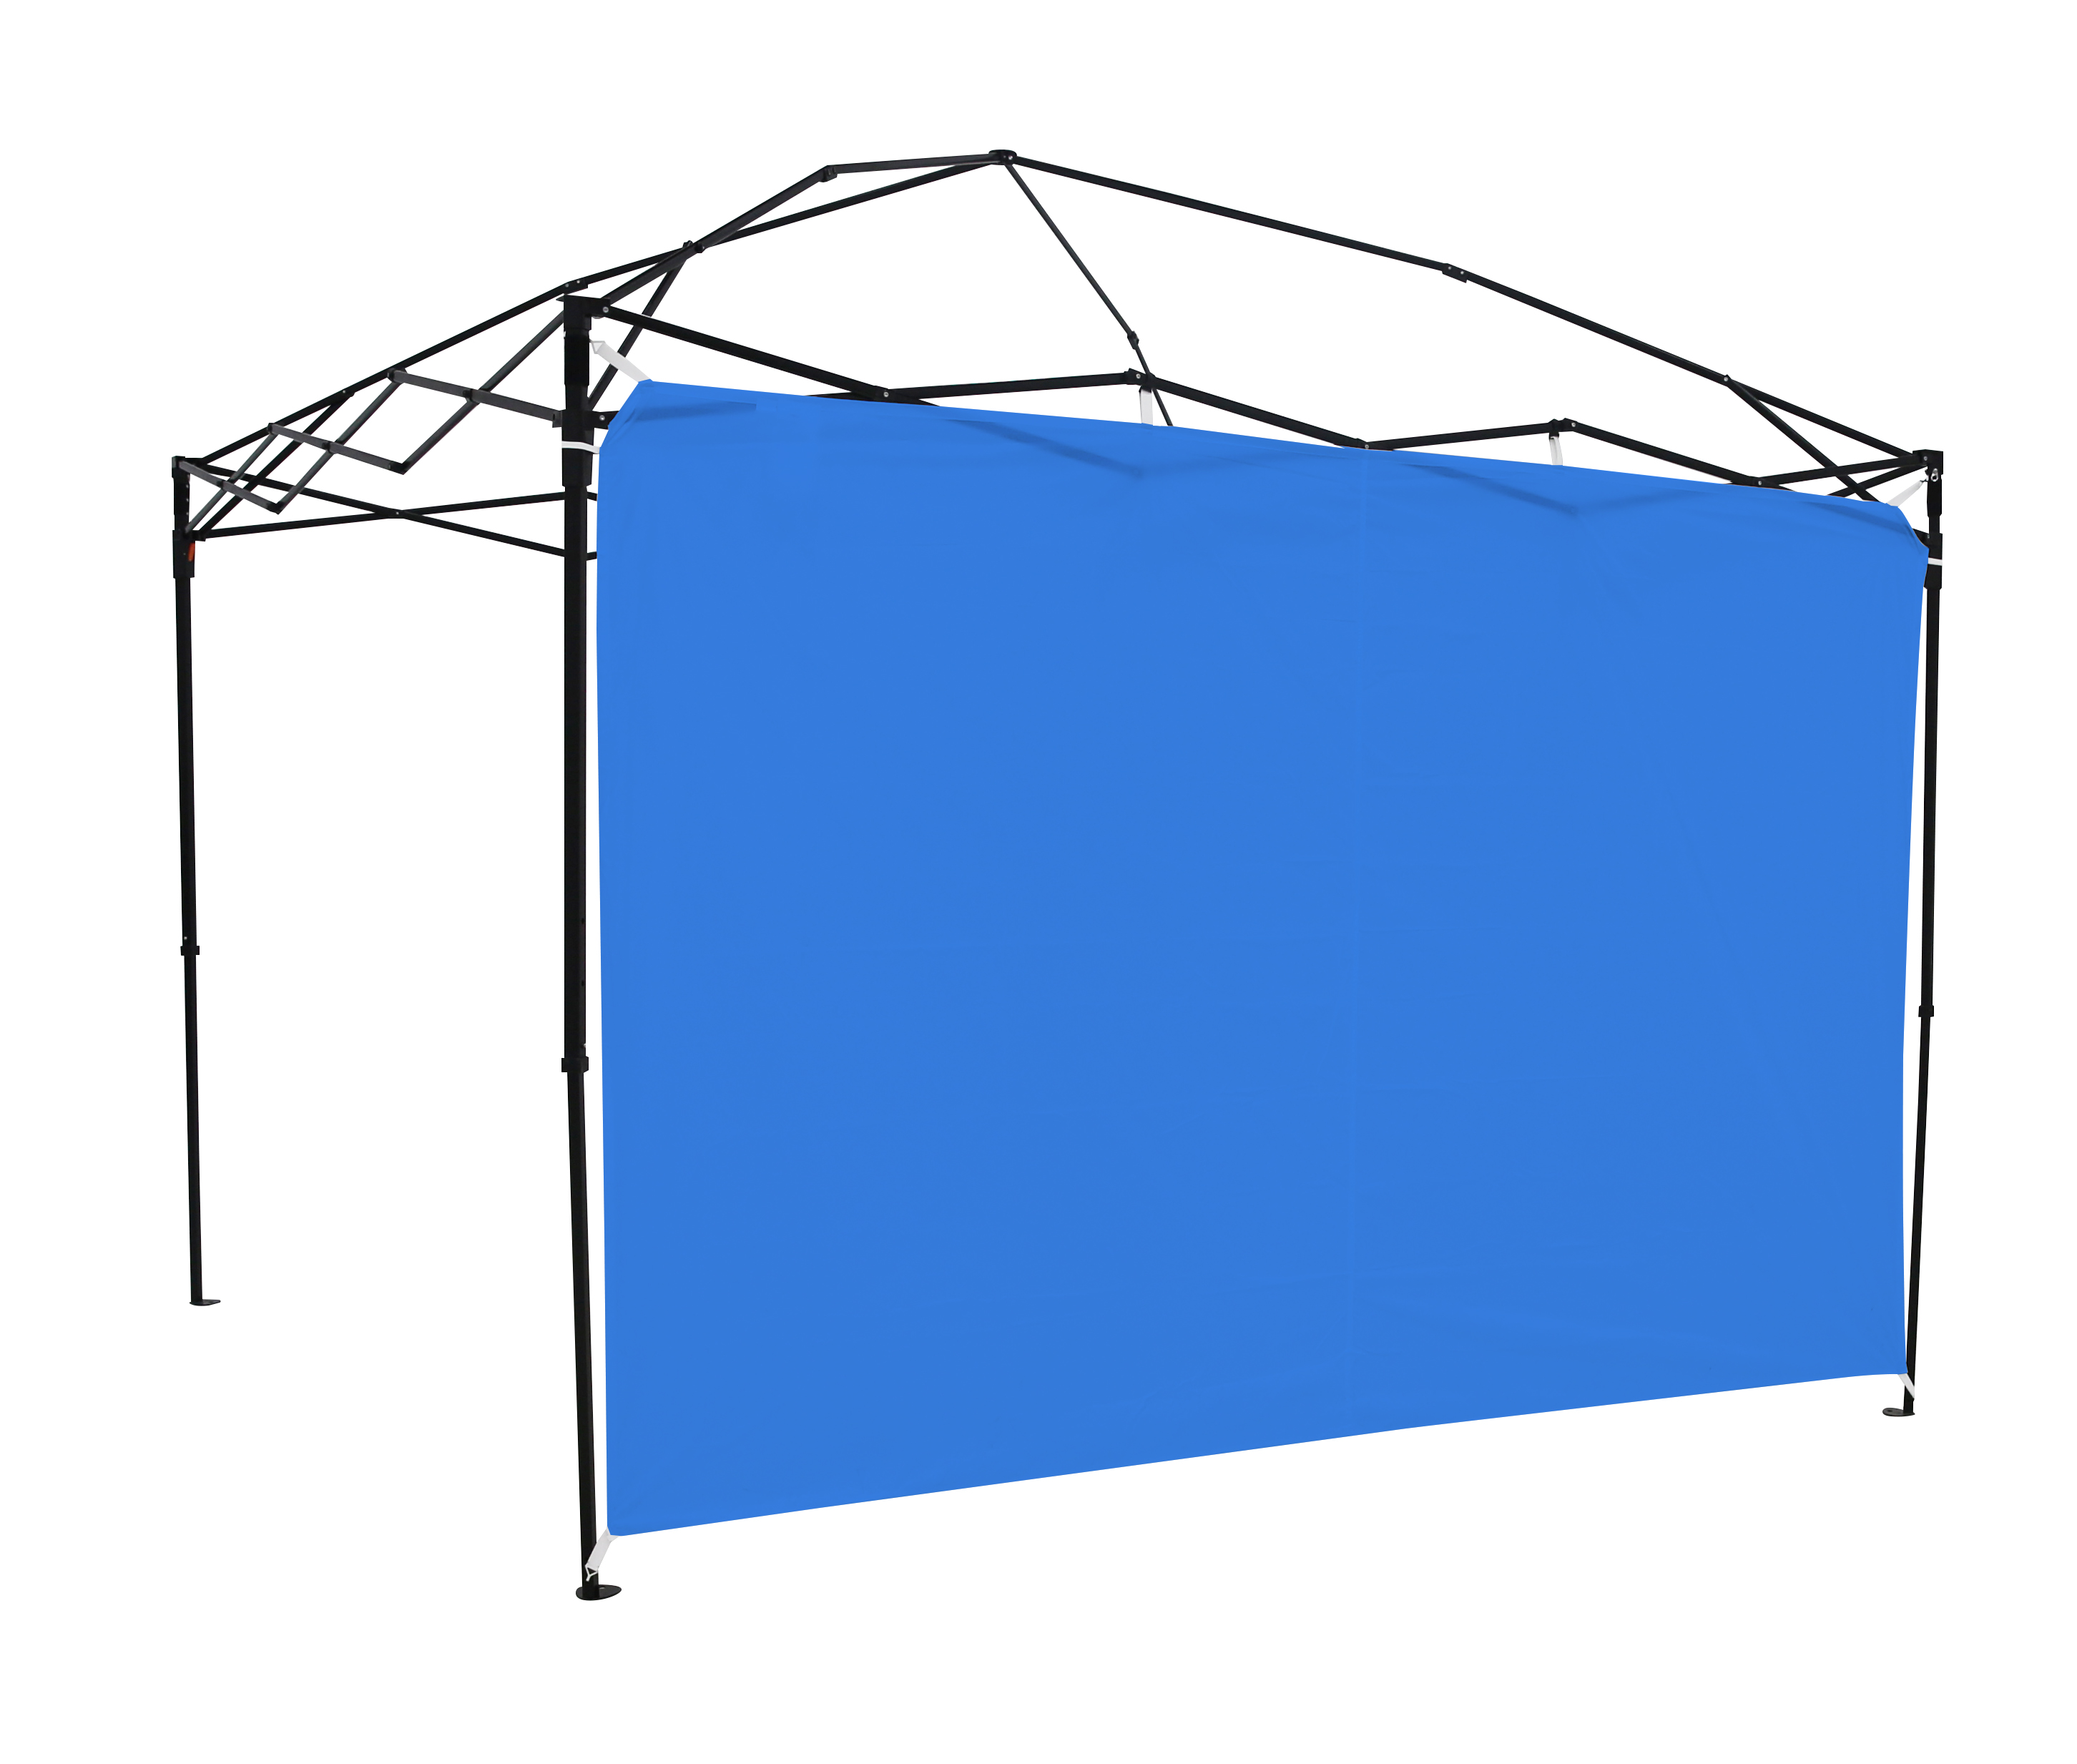 Ozark Trail Sun Wall for 10' x 10' Instant Straight Leg Pop-up Canopy (Accessory Only), Blue - image 1 of 7